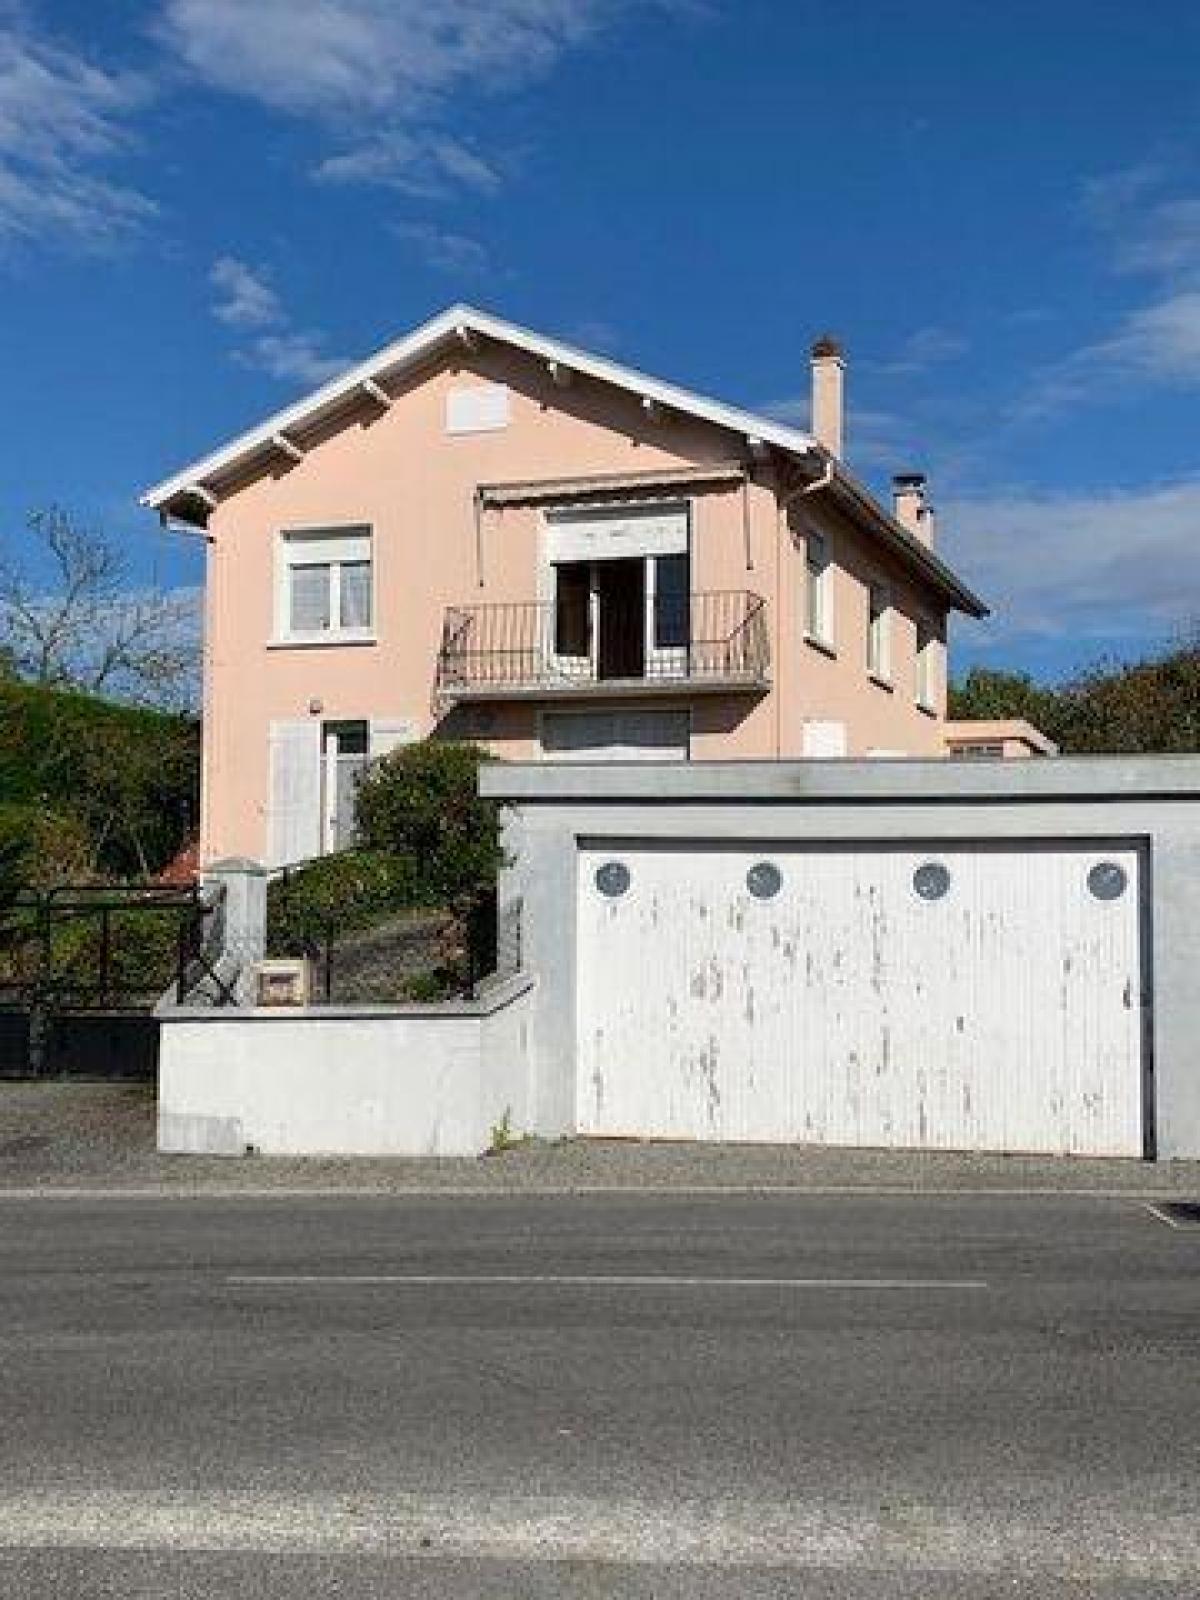 Picture of Home For Sale in Morlaas, Aquitaine, France